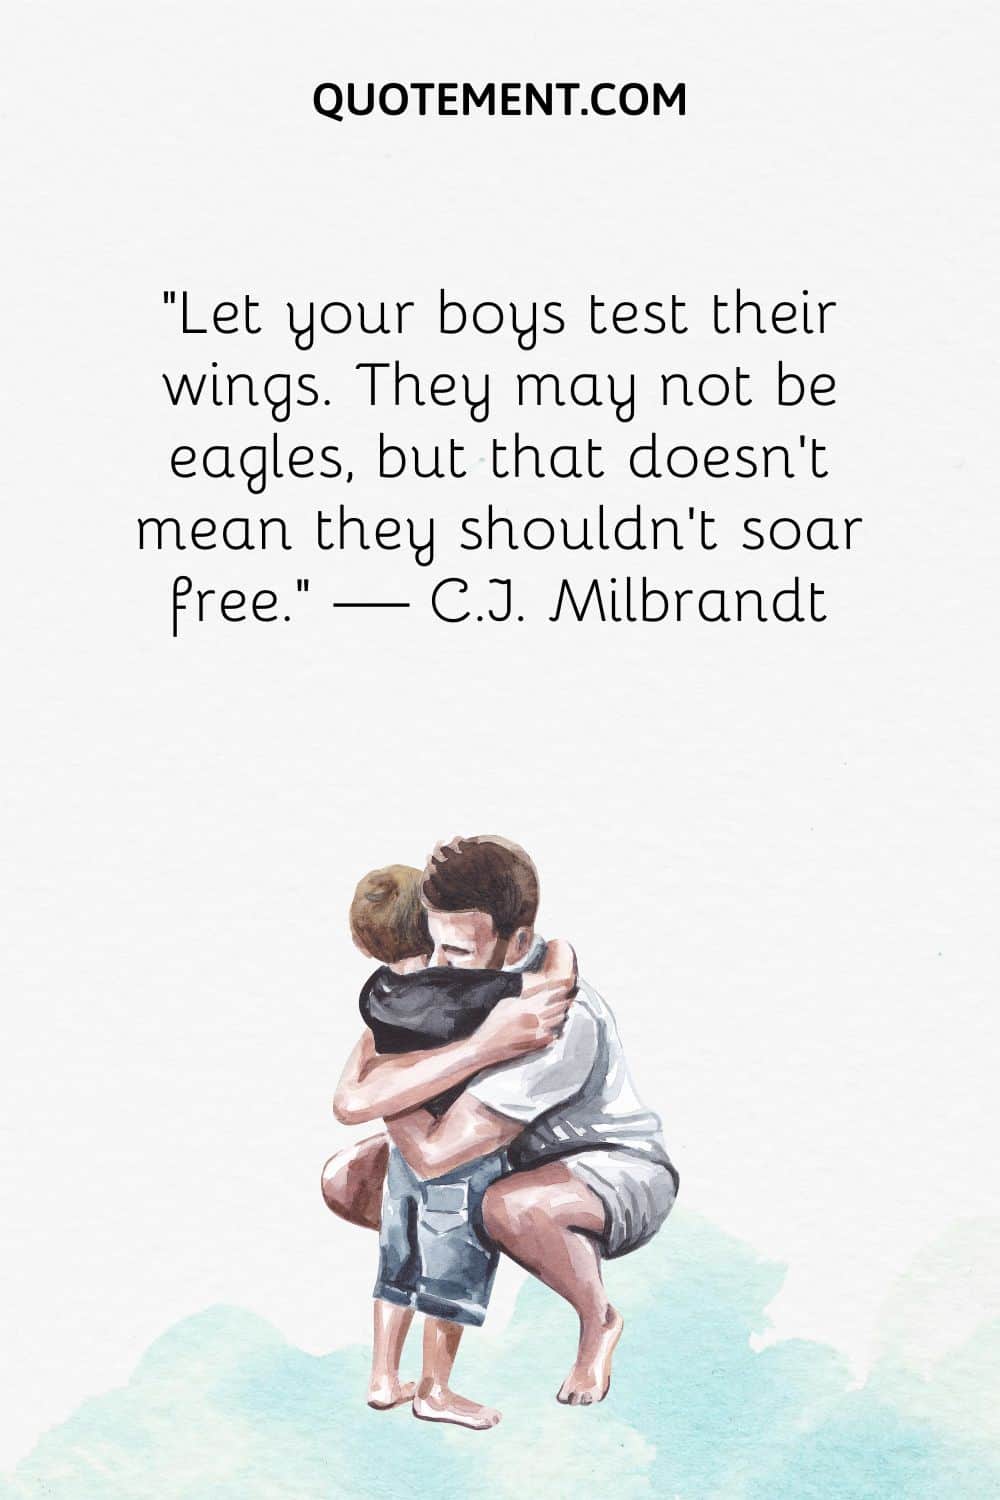 Let your boys test their wings